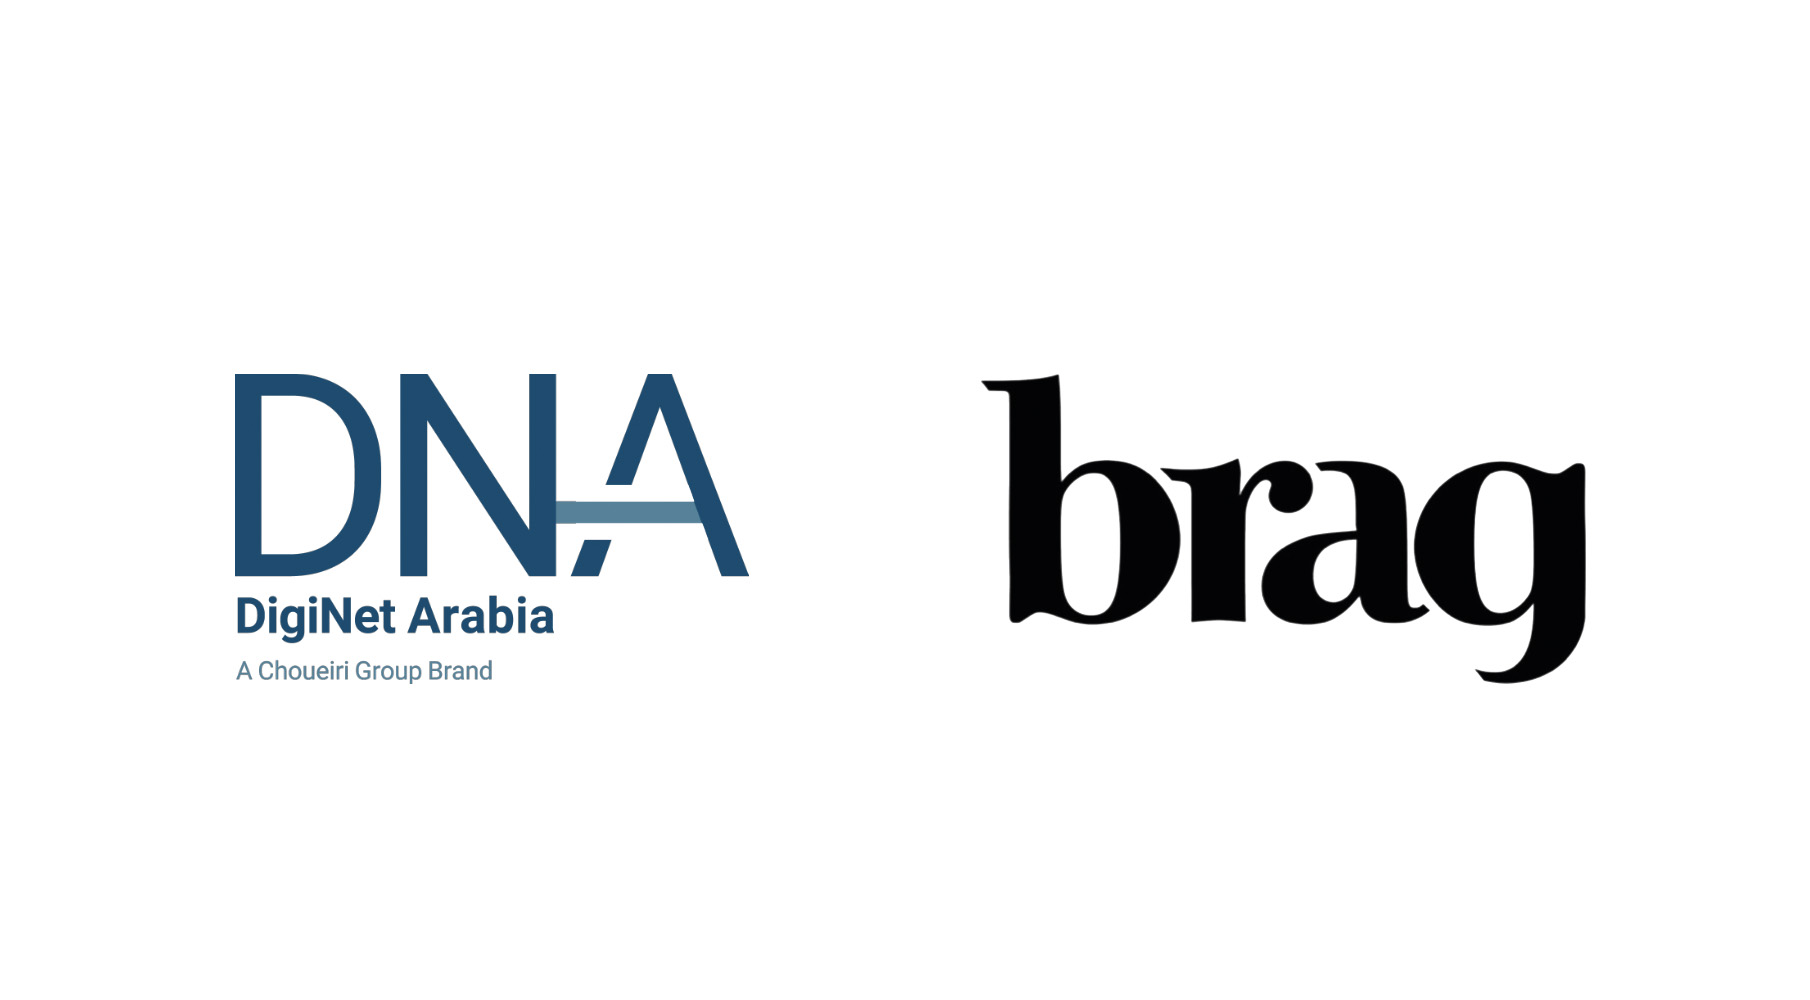 Event Agency Brag Appoints Choueiri Group’s DigiNet Arabia (DNA) as Exclusive Media Representatives in the UAE